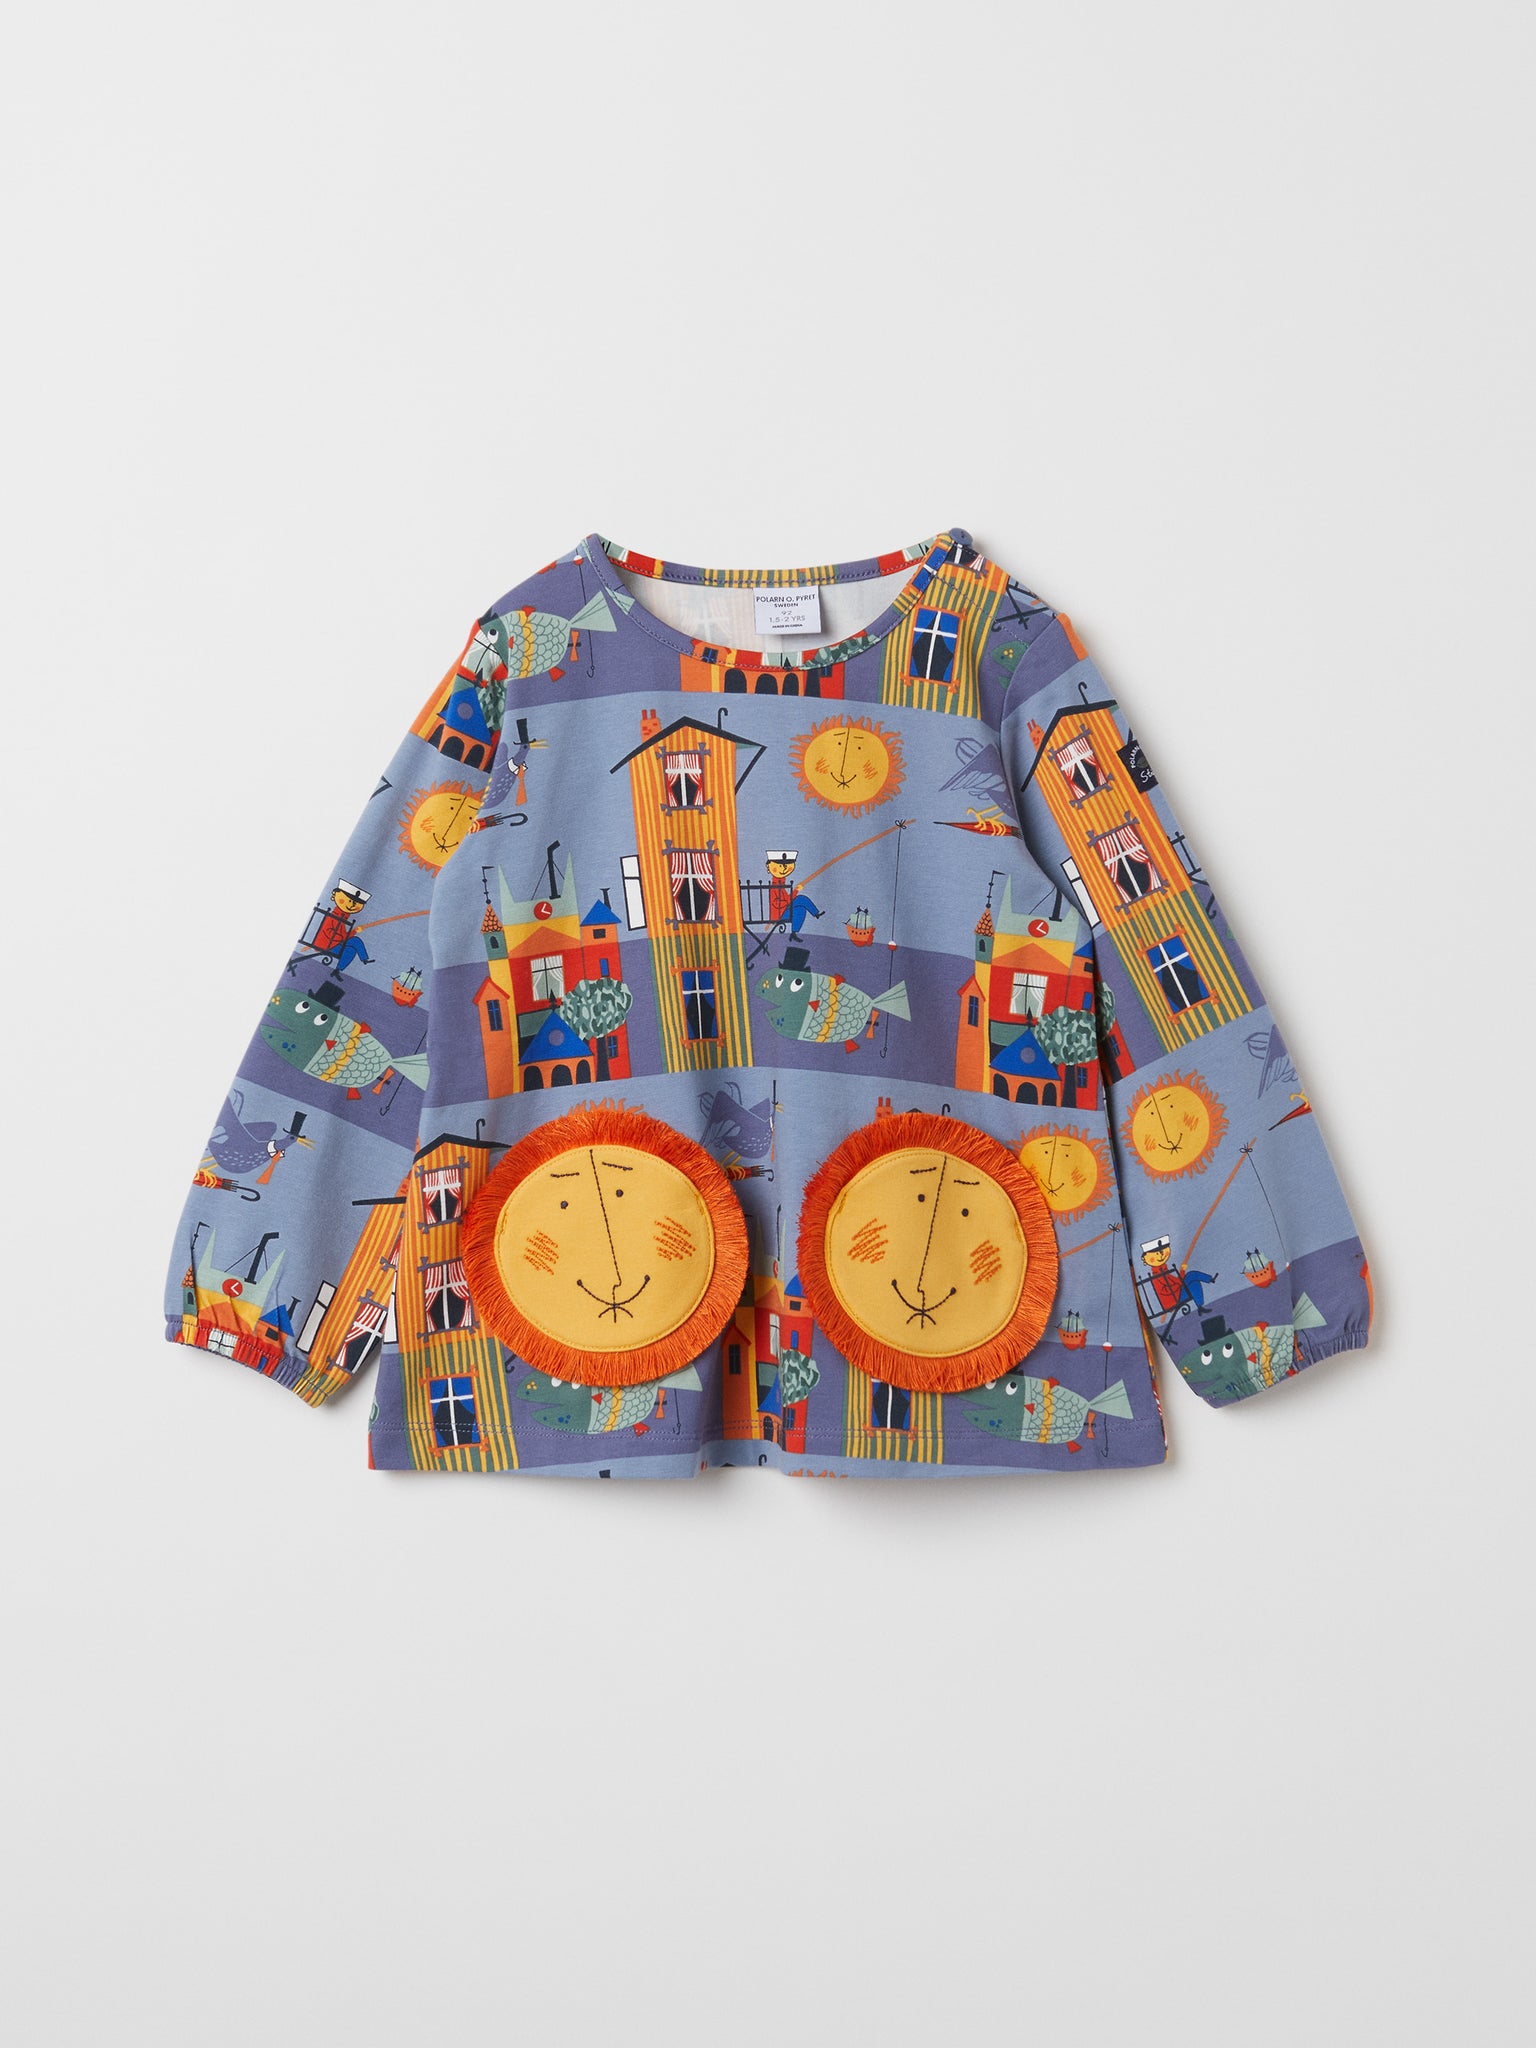 Sun Pocket Scandi Kids Top from the Polarn O. Pyret kidswear collection. The best ethical kids clothes